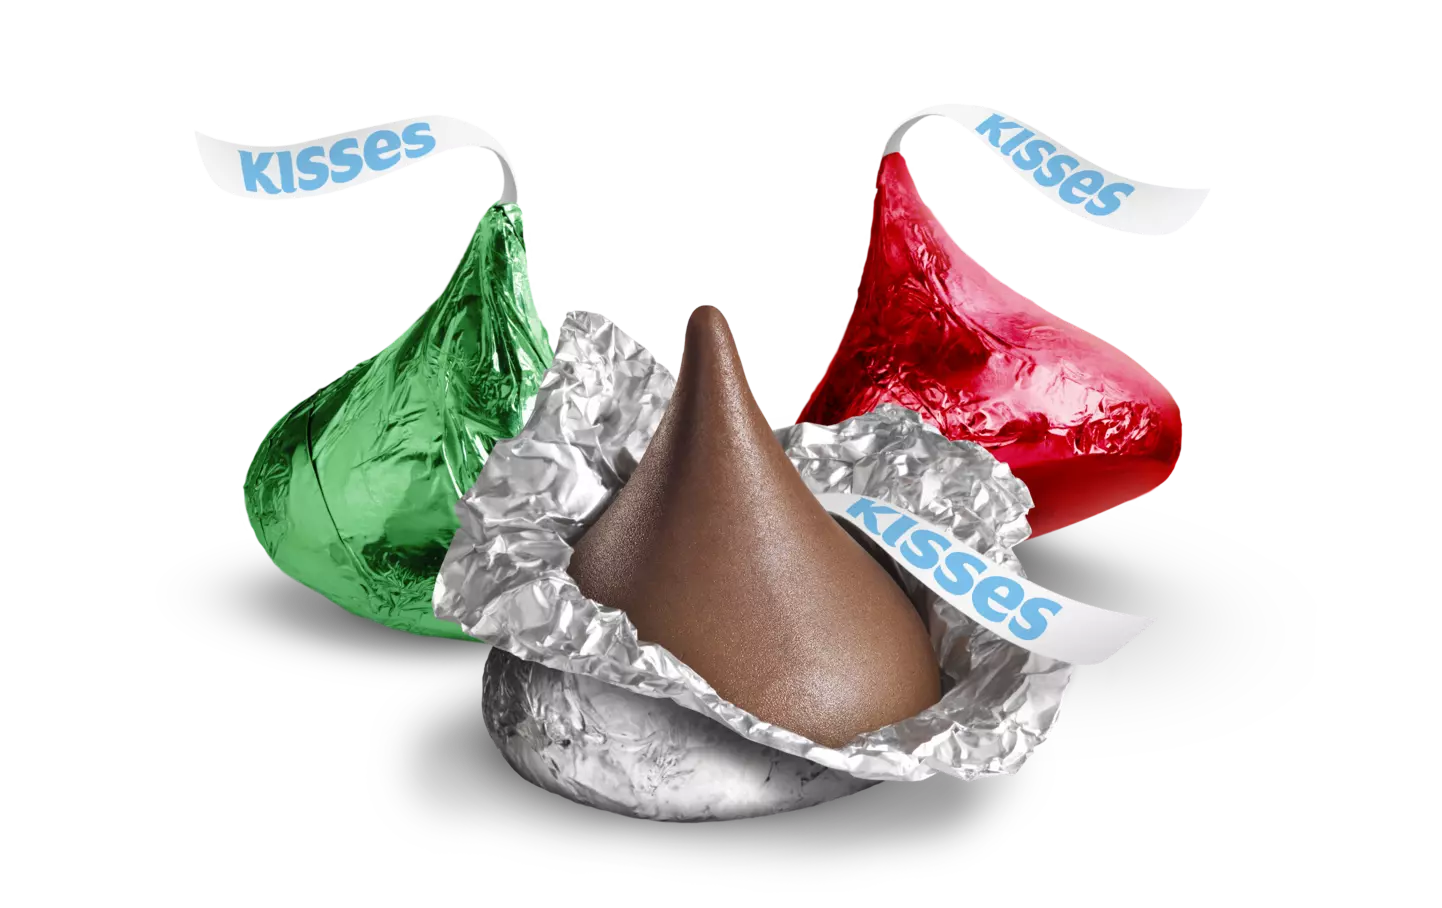 HERSHEY'S KISSES Holiday Milk Chocolate Candy, 2.24 oz cane - Out of Package